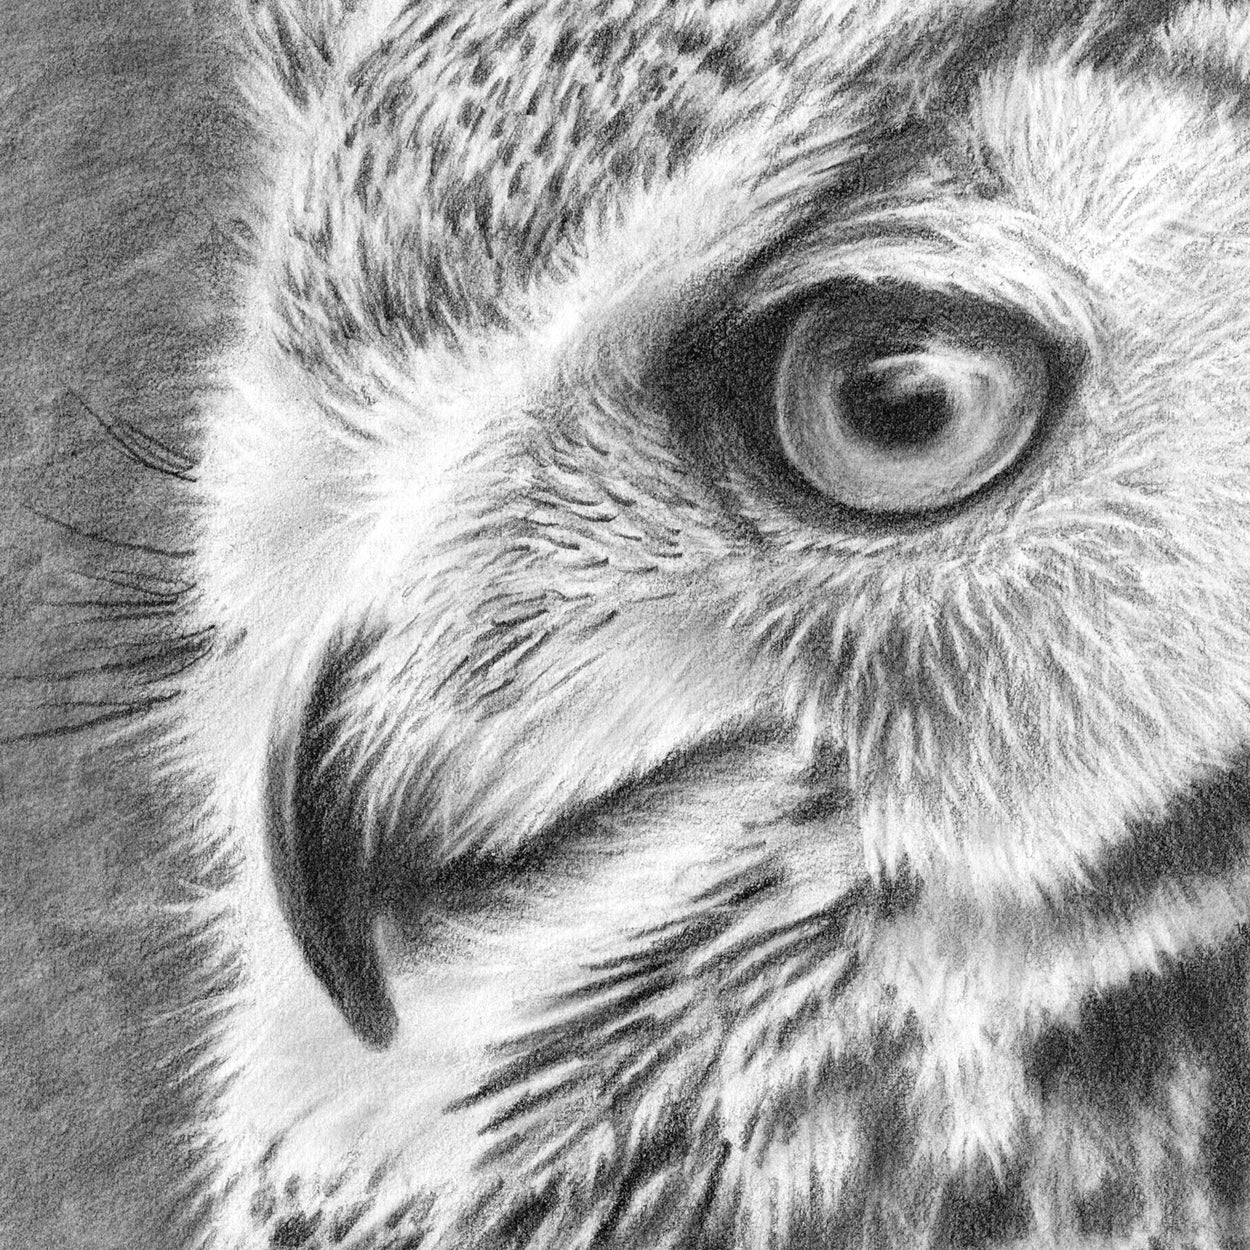 Great Horned Owl Graphite Drawing Close-up 2 - The Thriving Wild